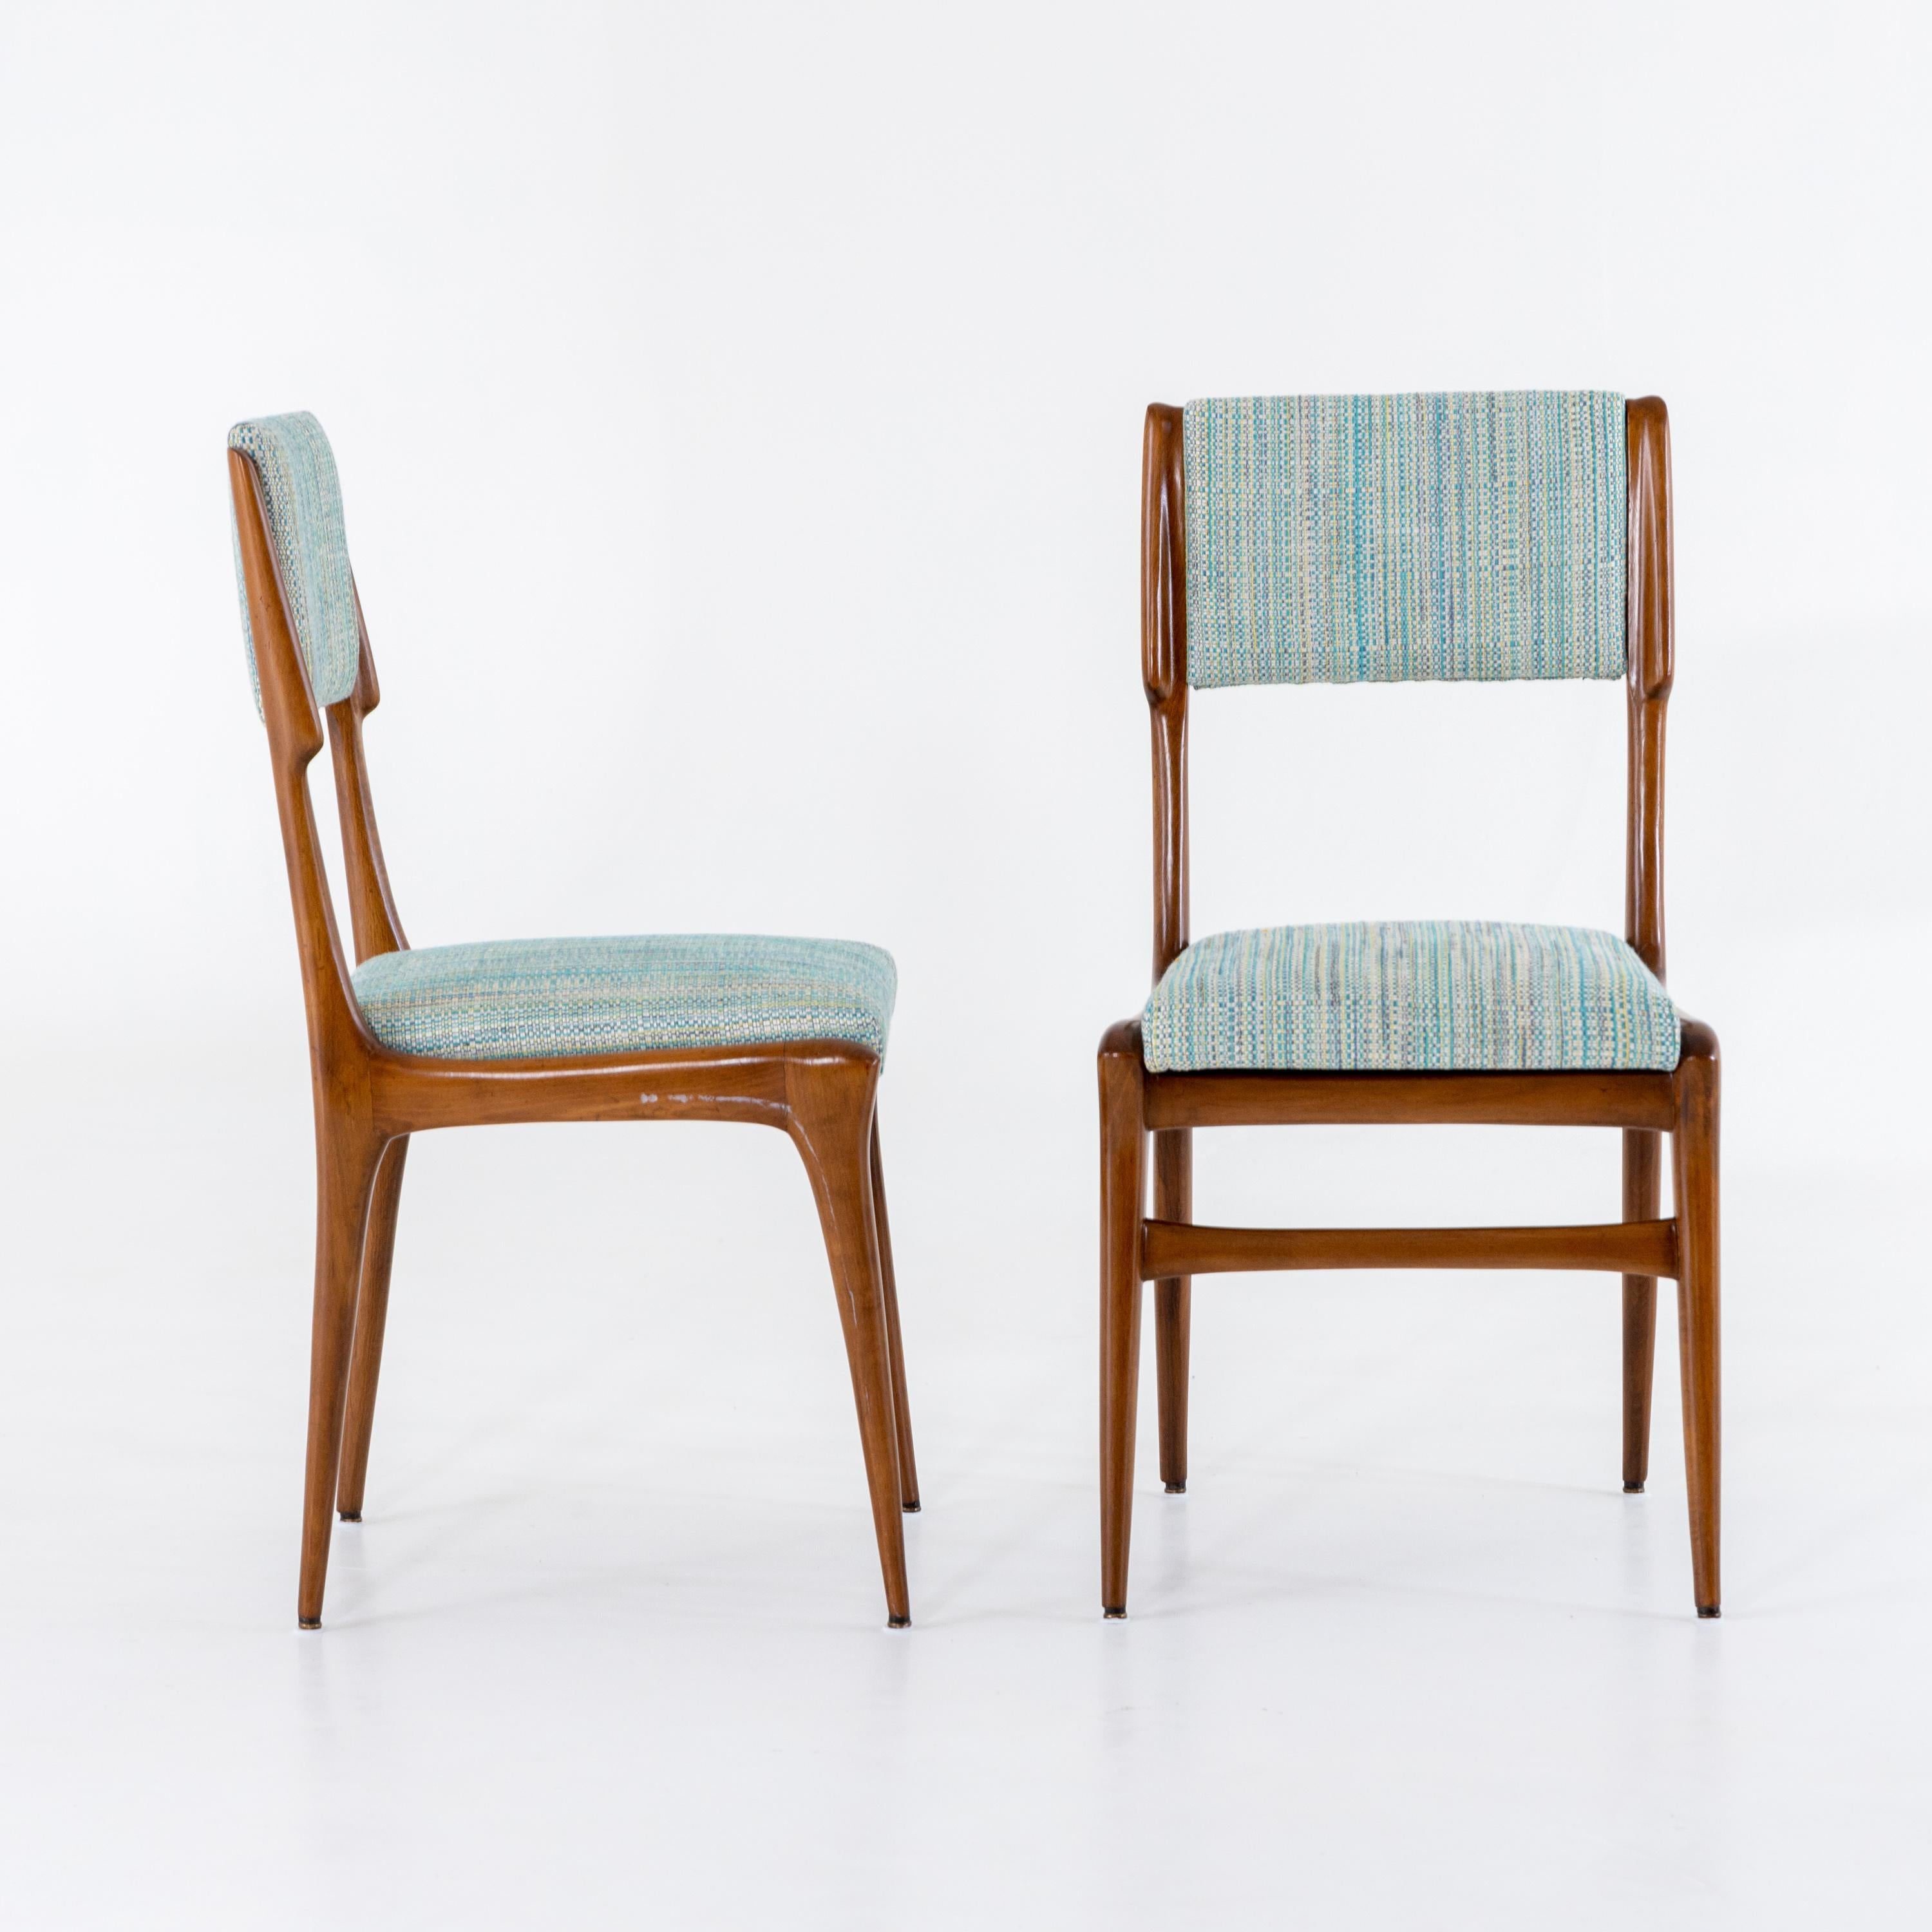 Dining Room Chairs, Italy Mid-20th Century 2